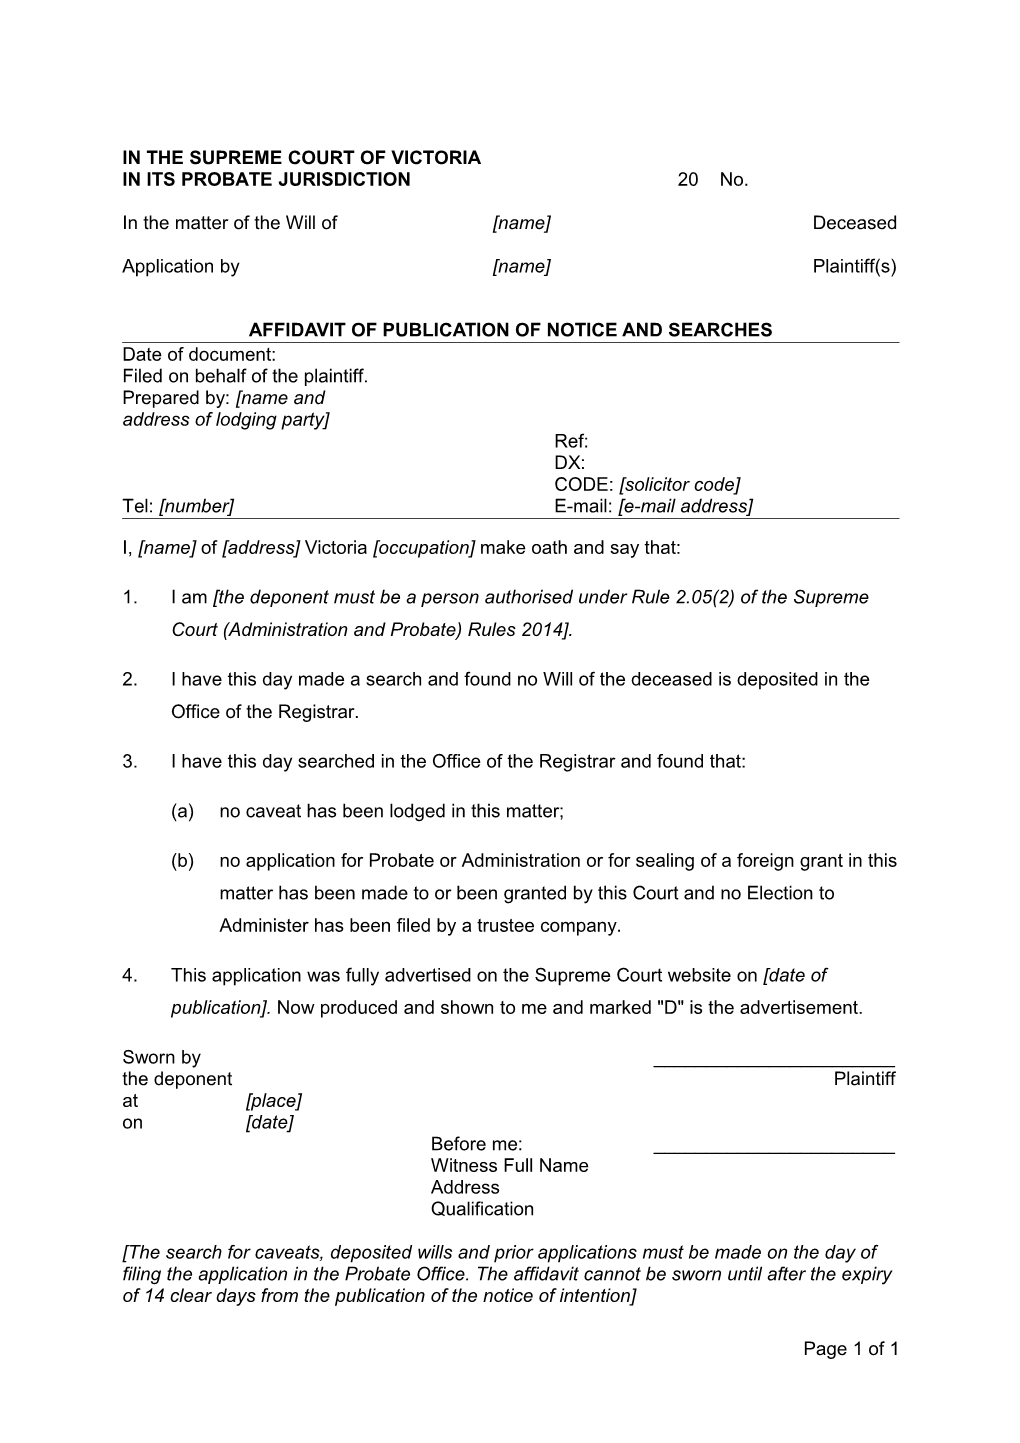 Affidavit of Publication of Notice and Searches - Probate